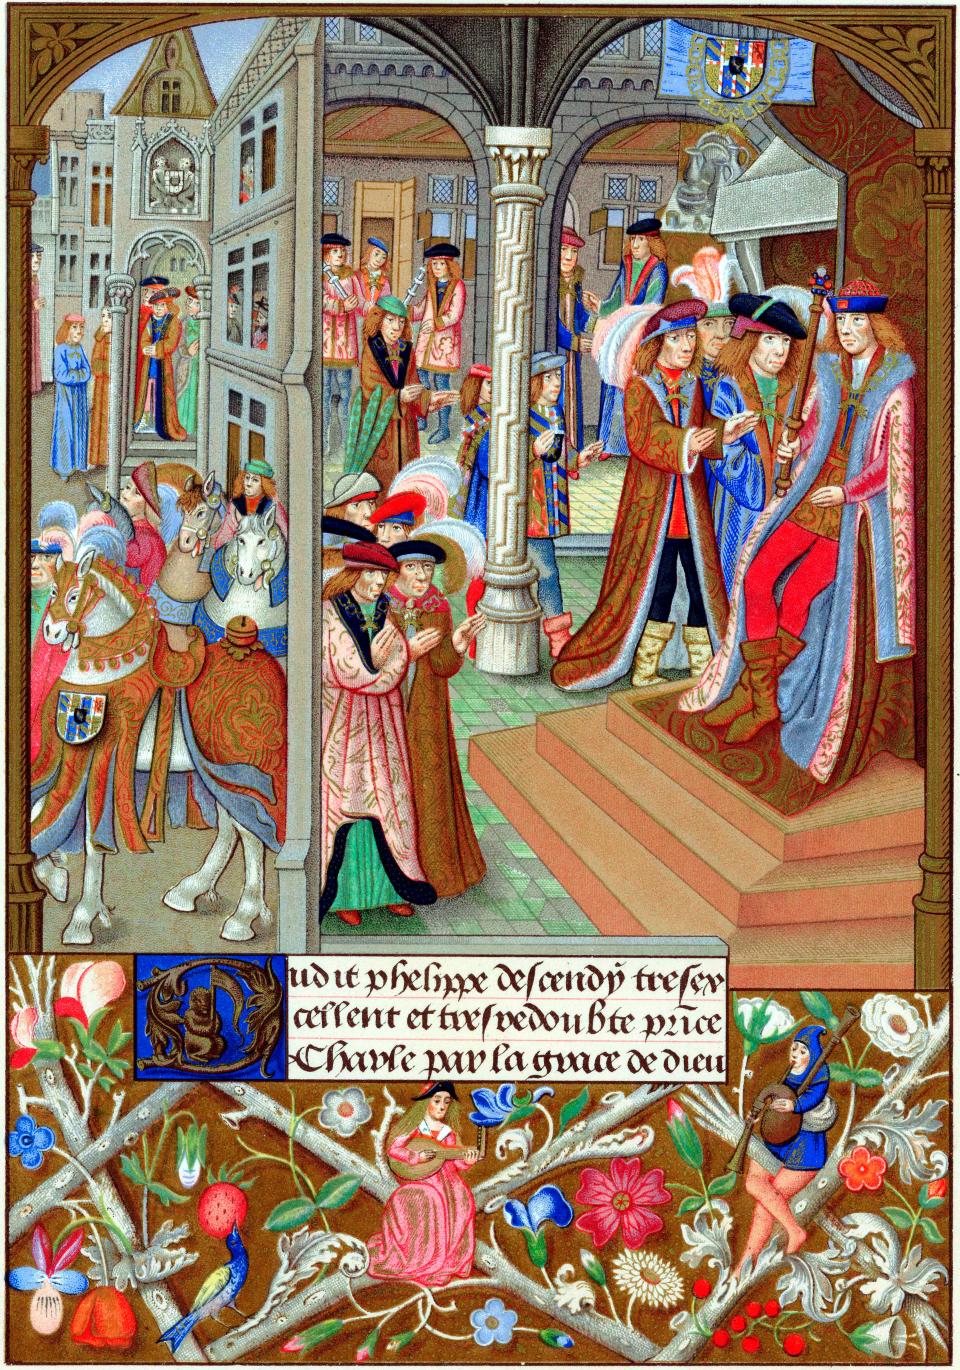 Illuminated manuscript page depicting a medieval scene with multiple figures in elaborate attire engaging in various activities